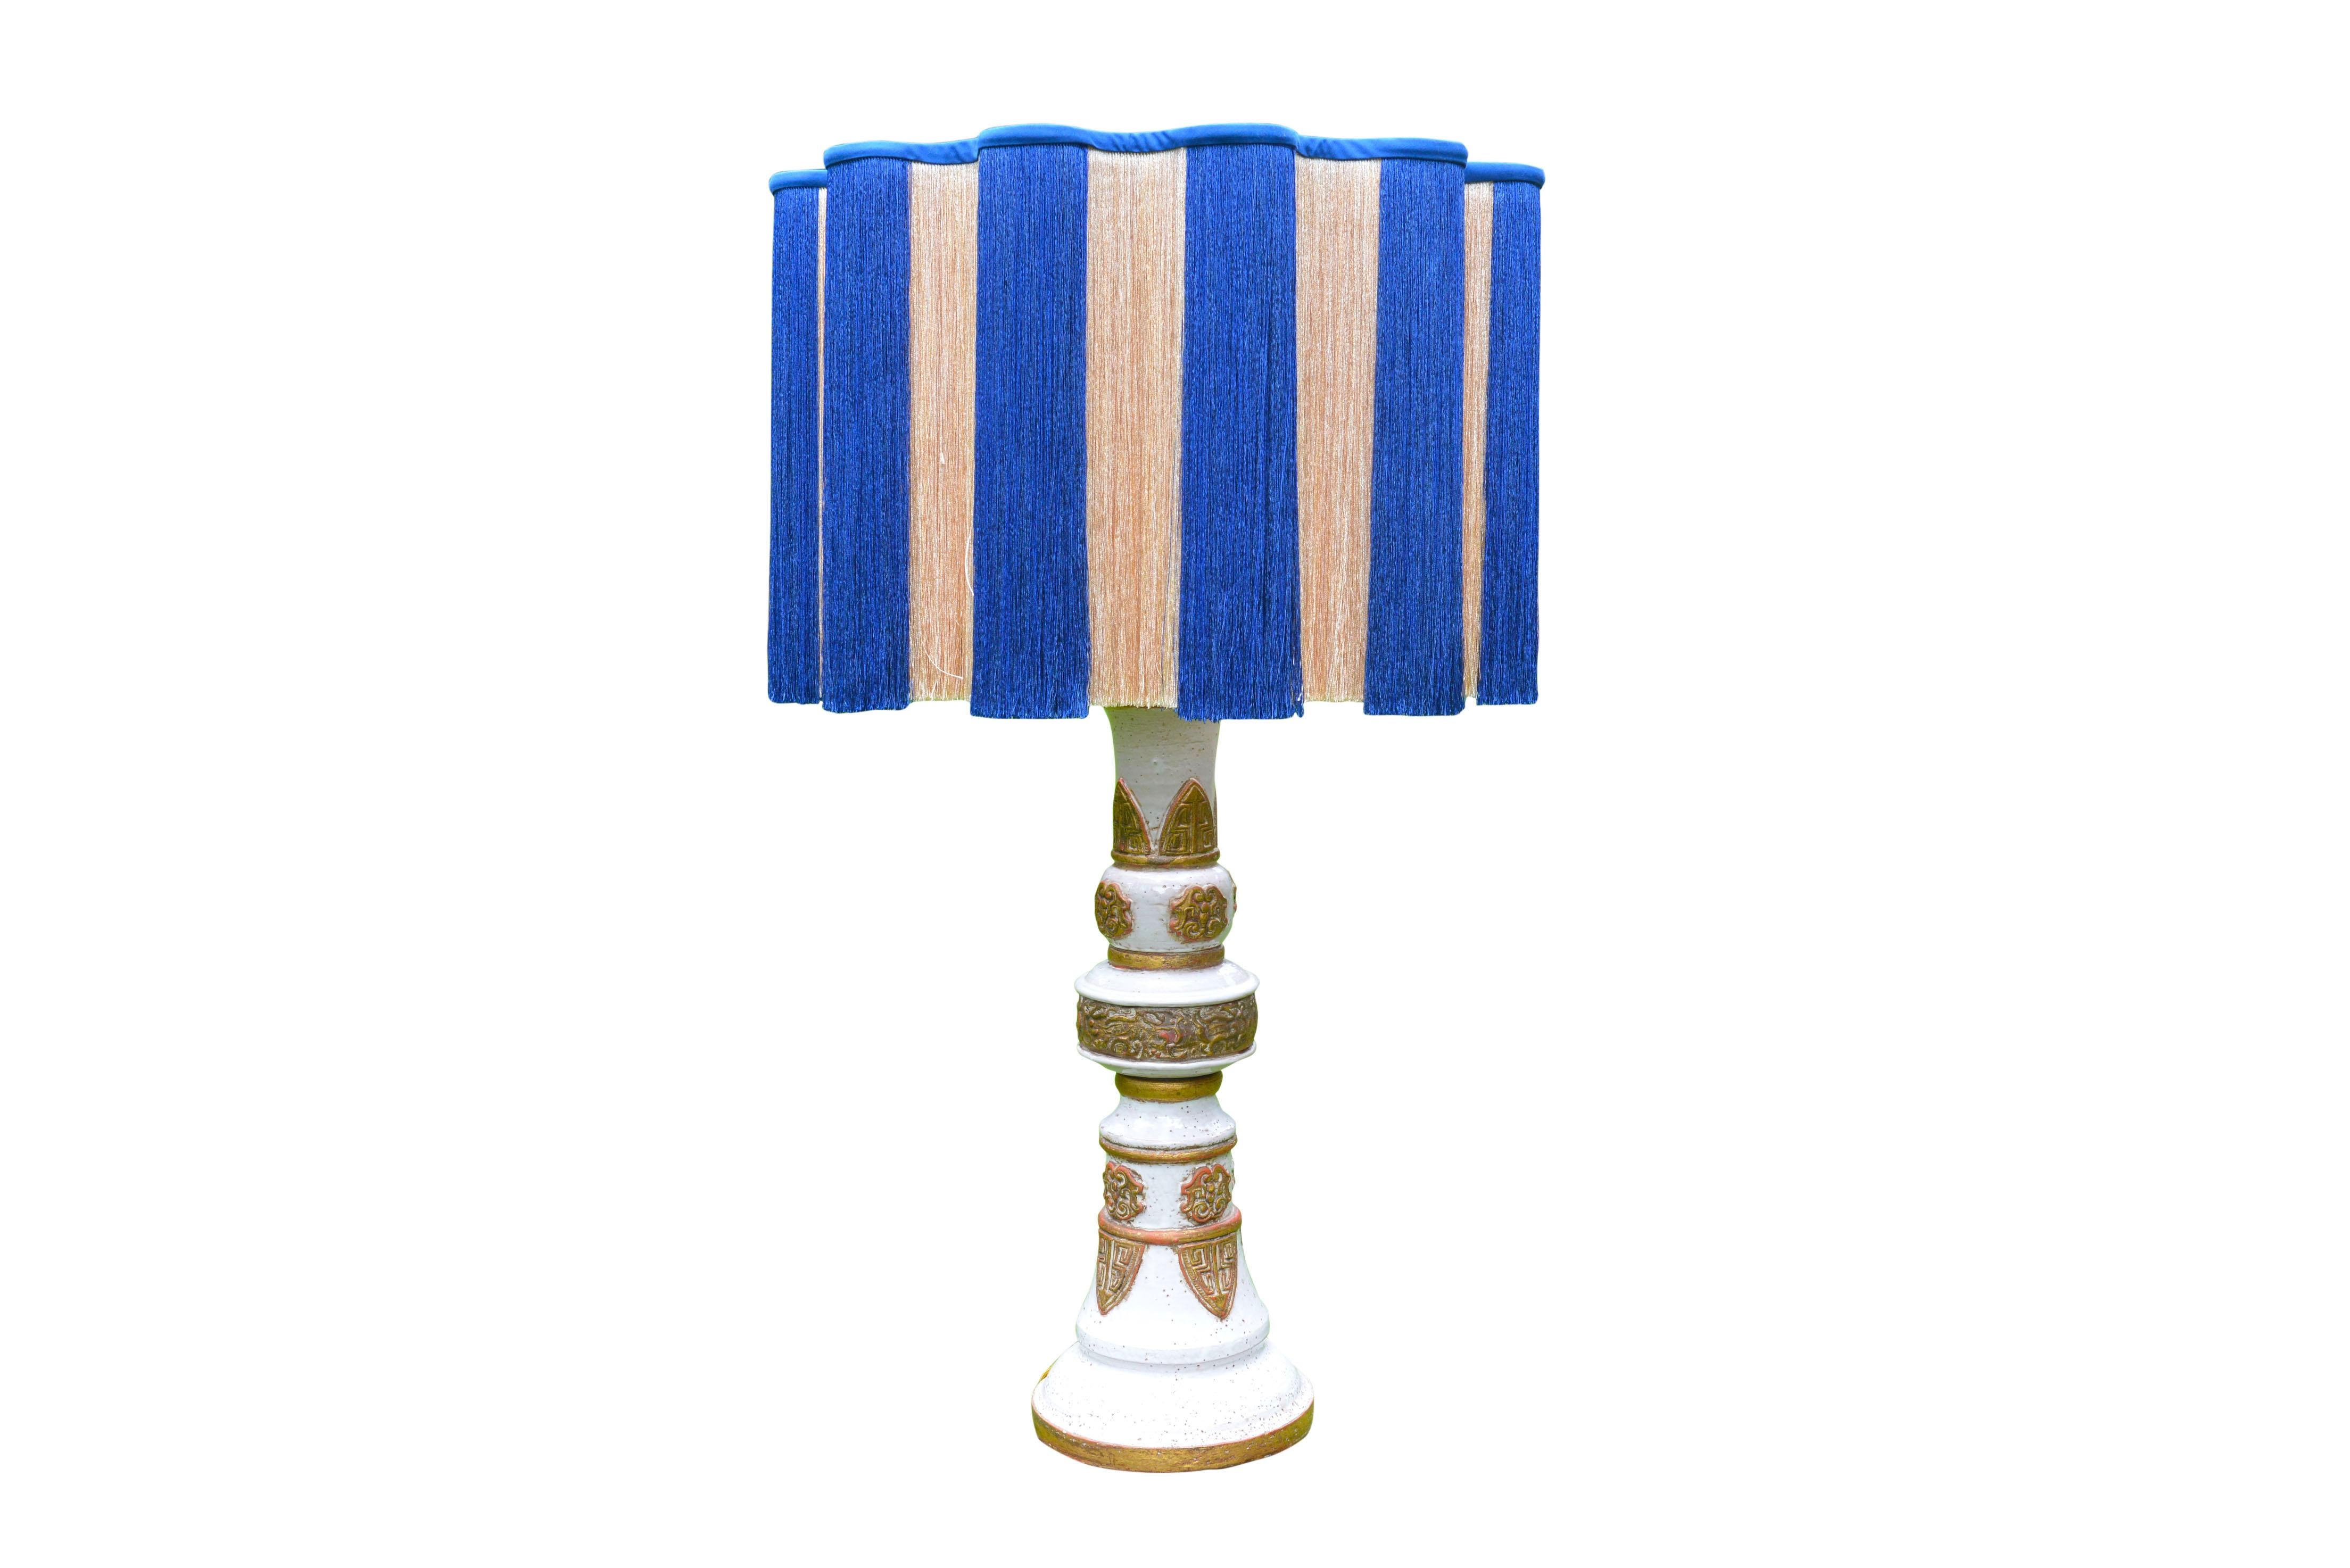 Stunning pair of table lamps in white and gold chinoiserie inspired ceramic, made in France around 1960. With exquisite bespoke cream and blue fringe serpentine lamp shades.